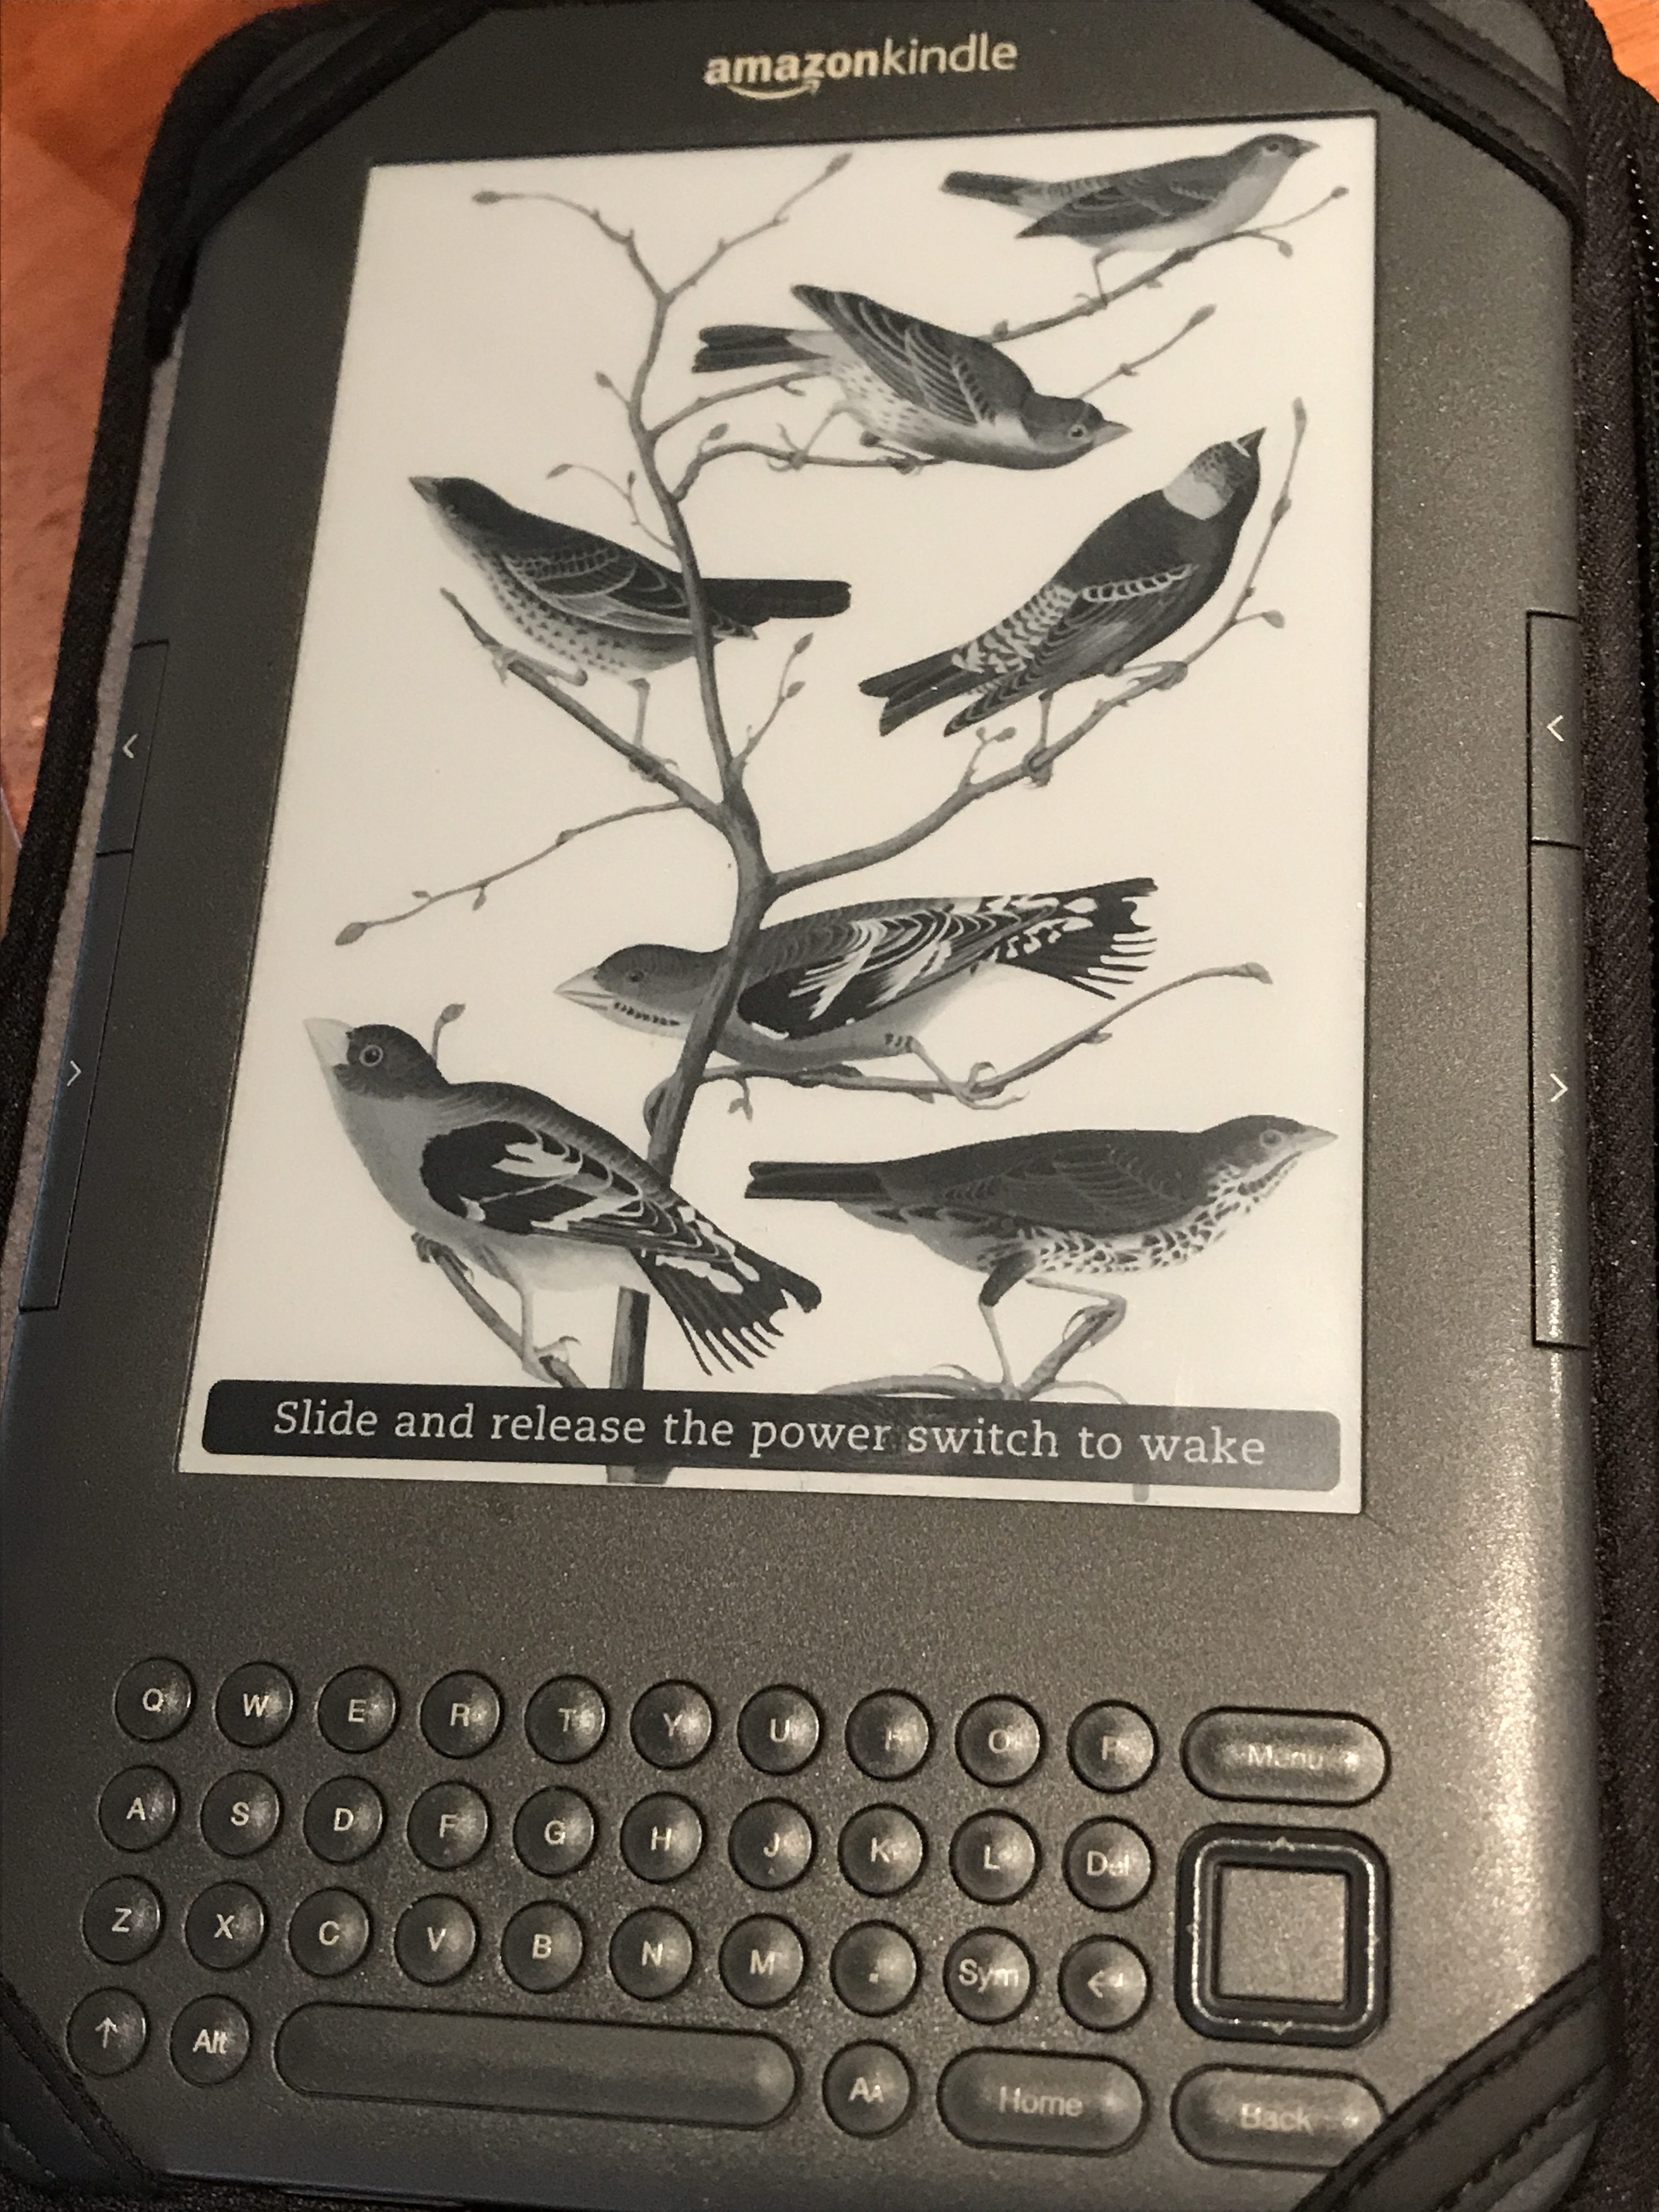 Early model kindle showing screensaver with birds